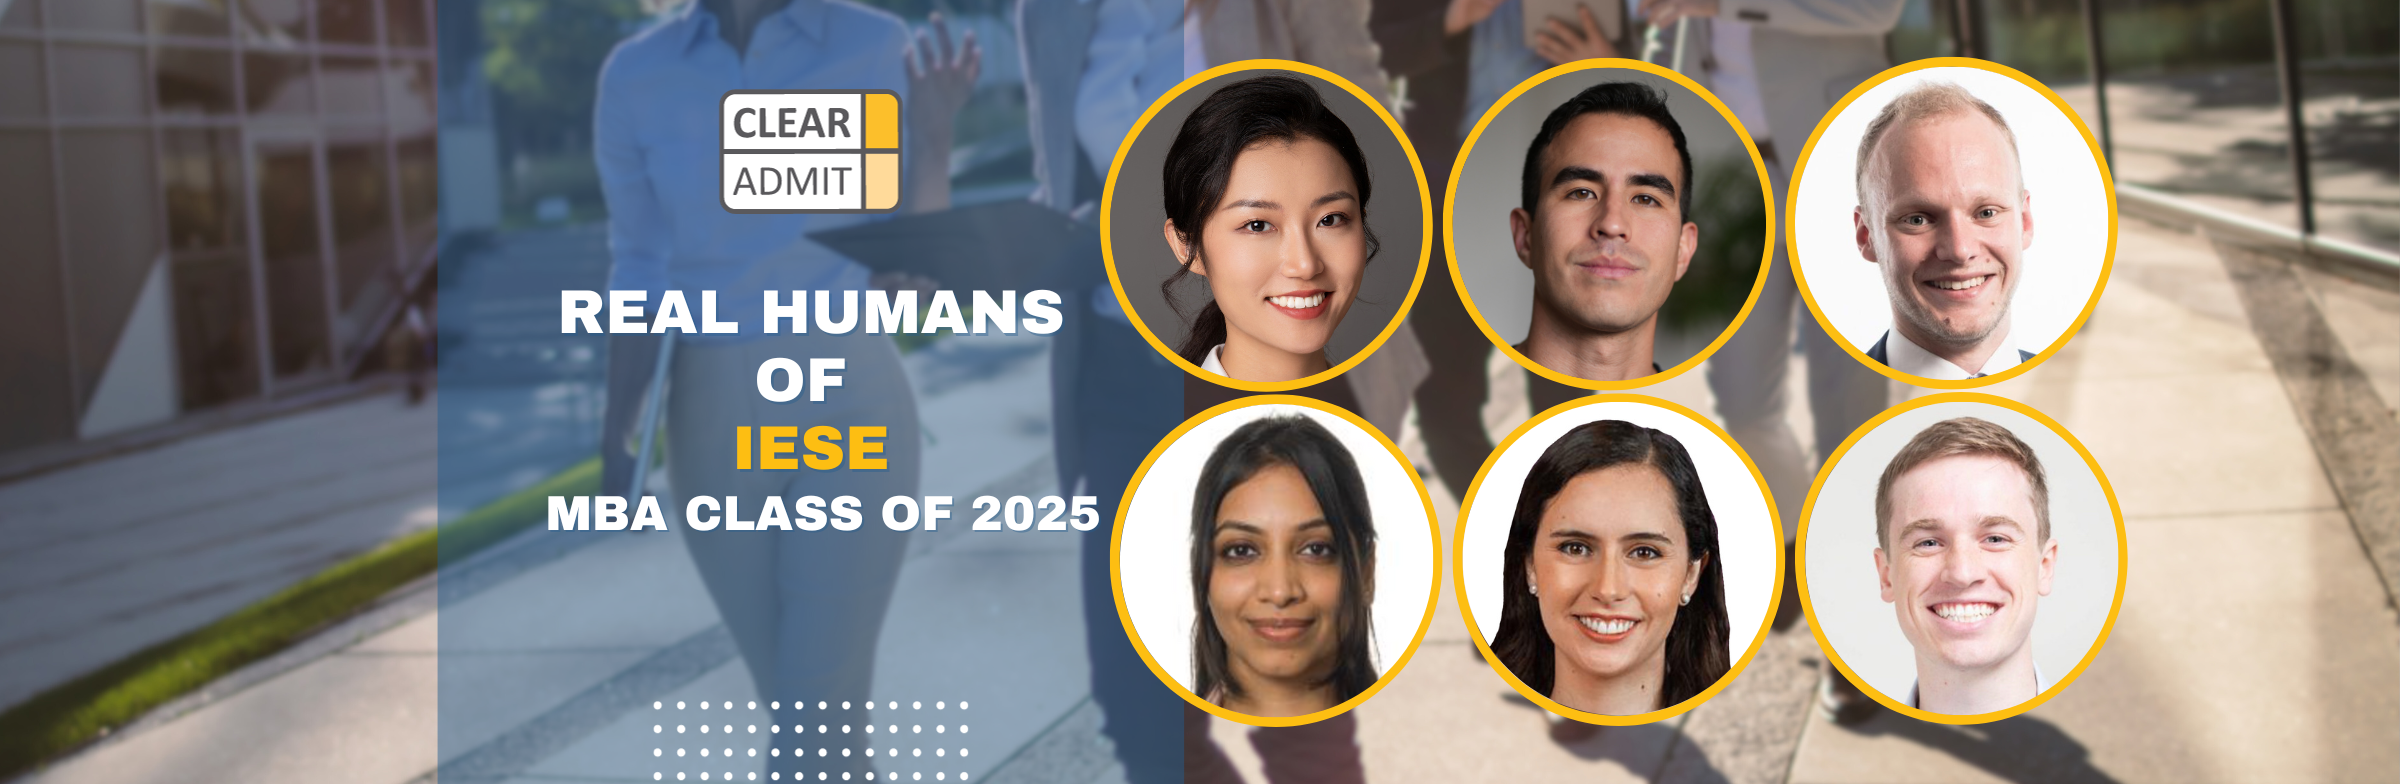 Image for Real Humans of the IESE Business School MBA Class of 2025